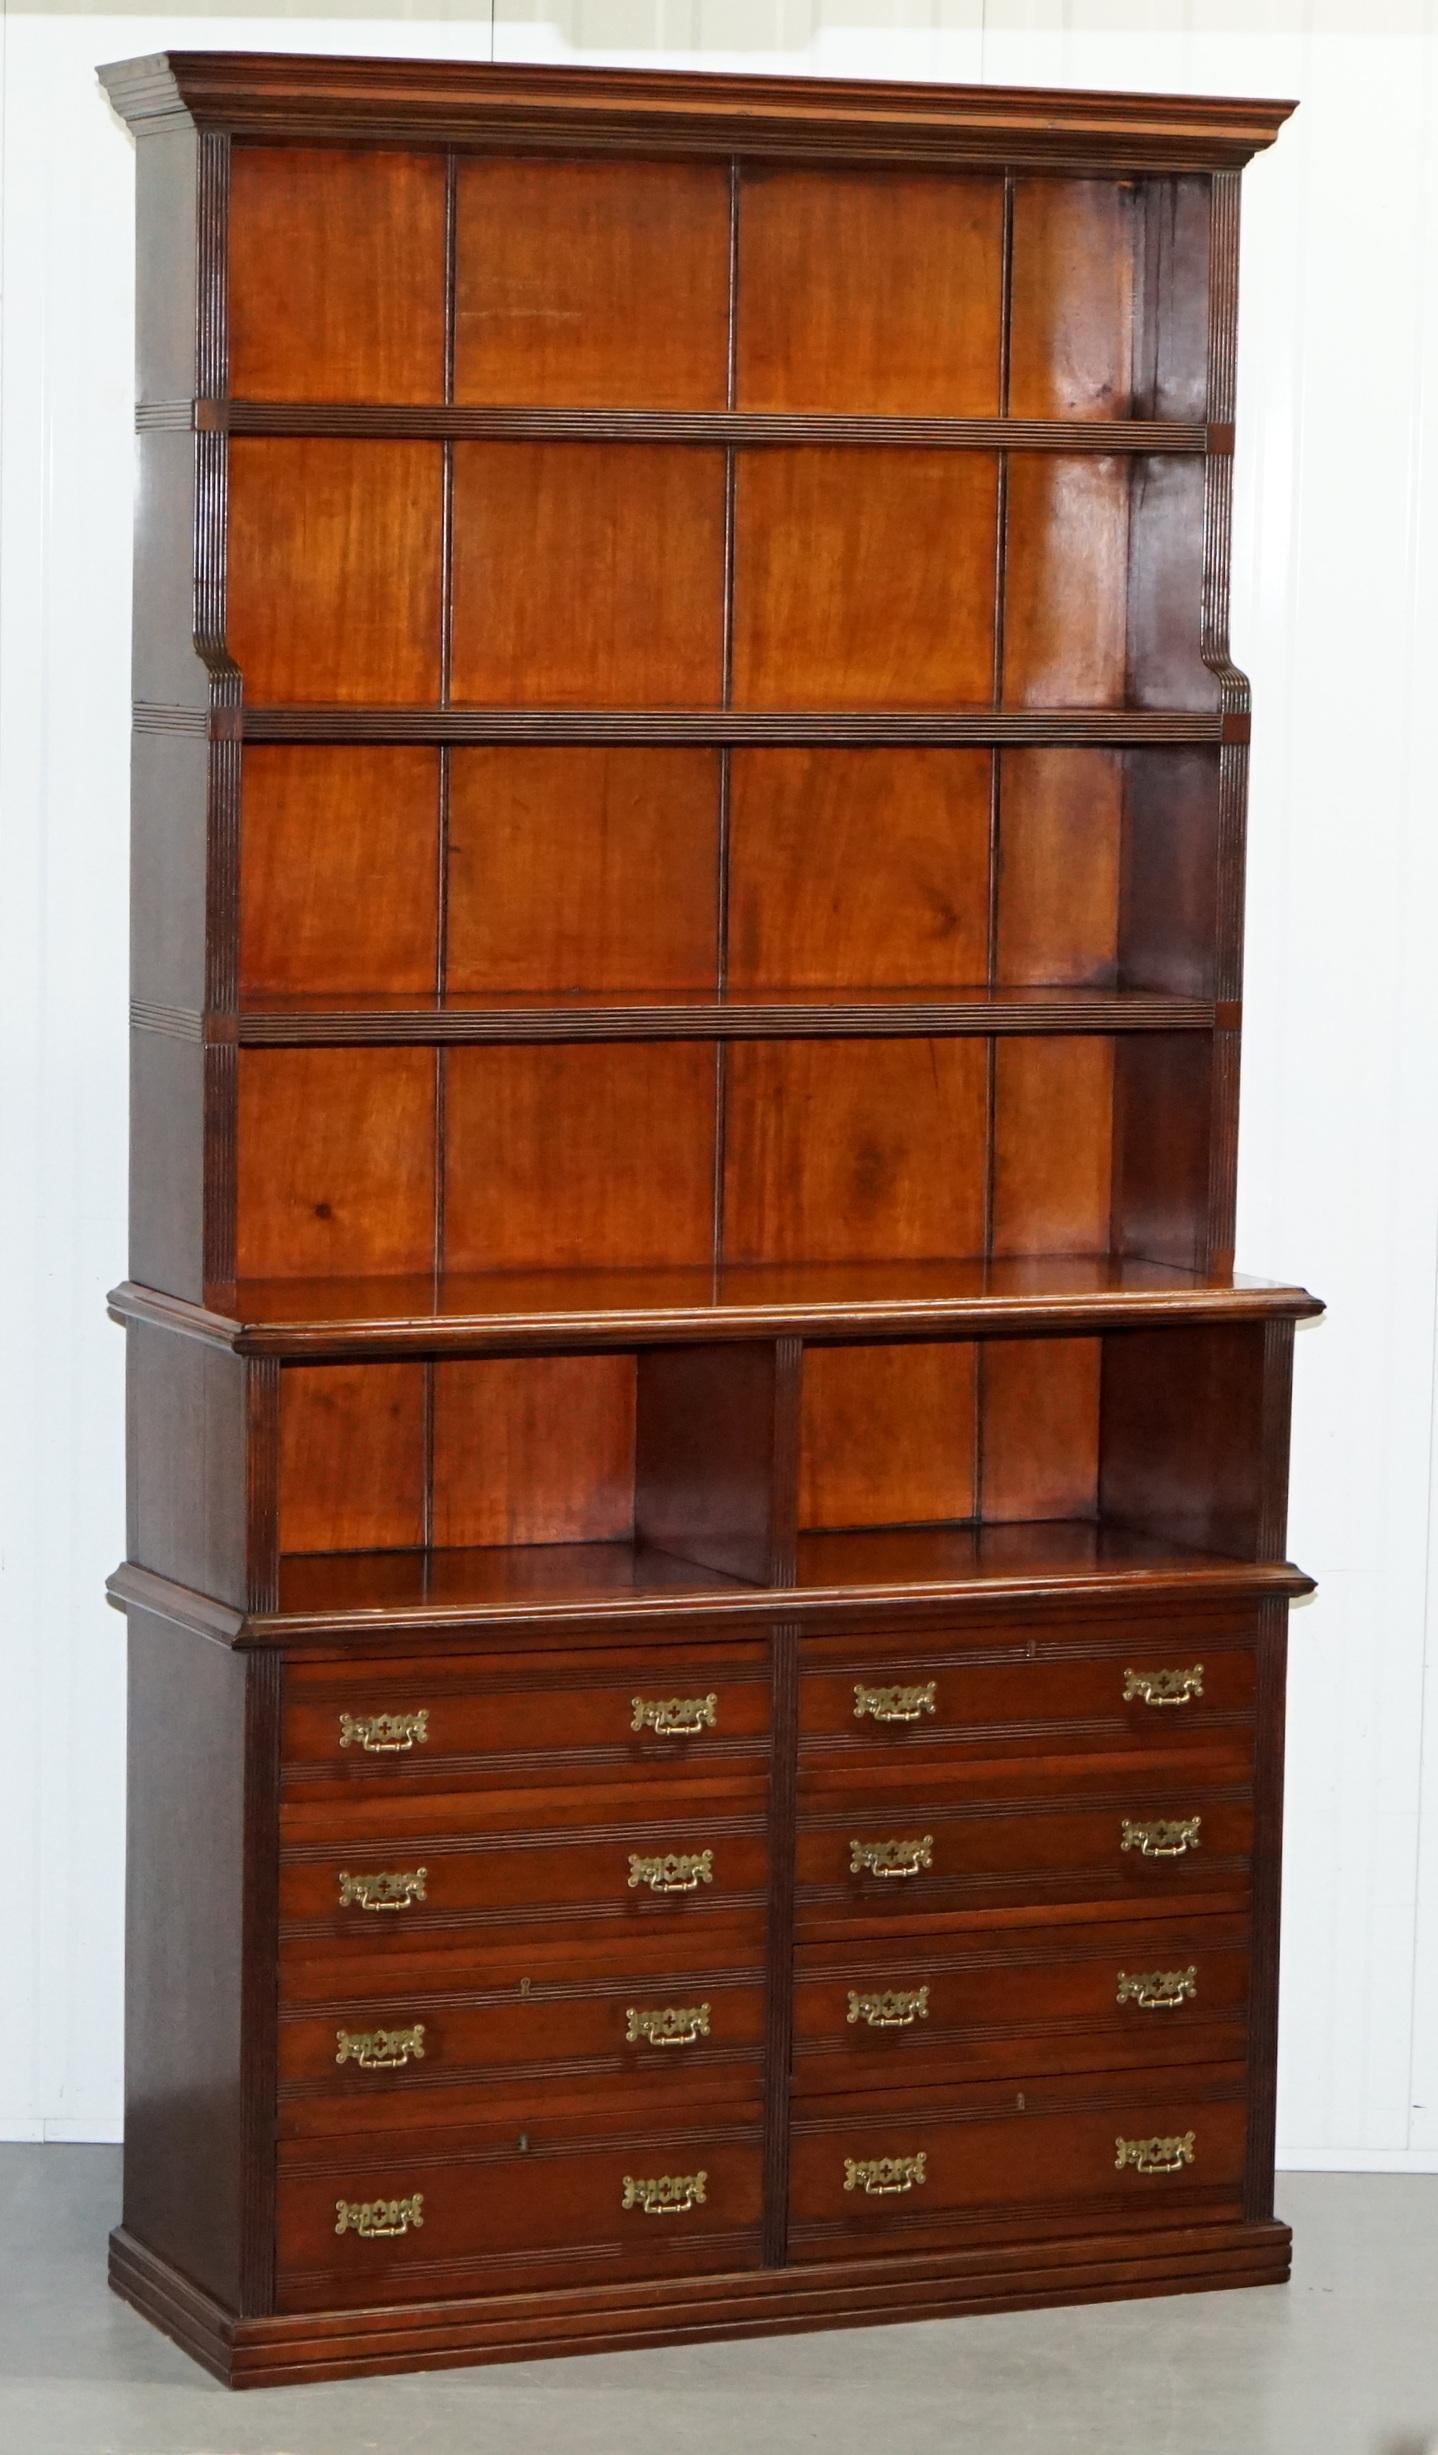 English Pair of Victorian Solid Walnut Library Bookcases Haberdashery Chest of Drawers